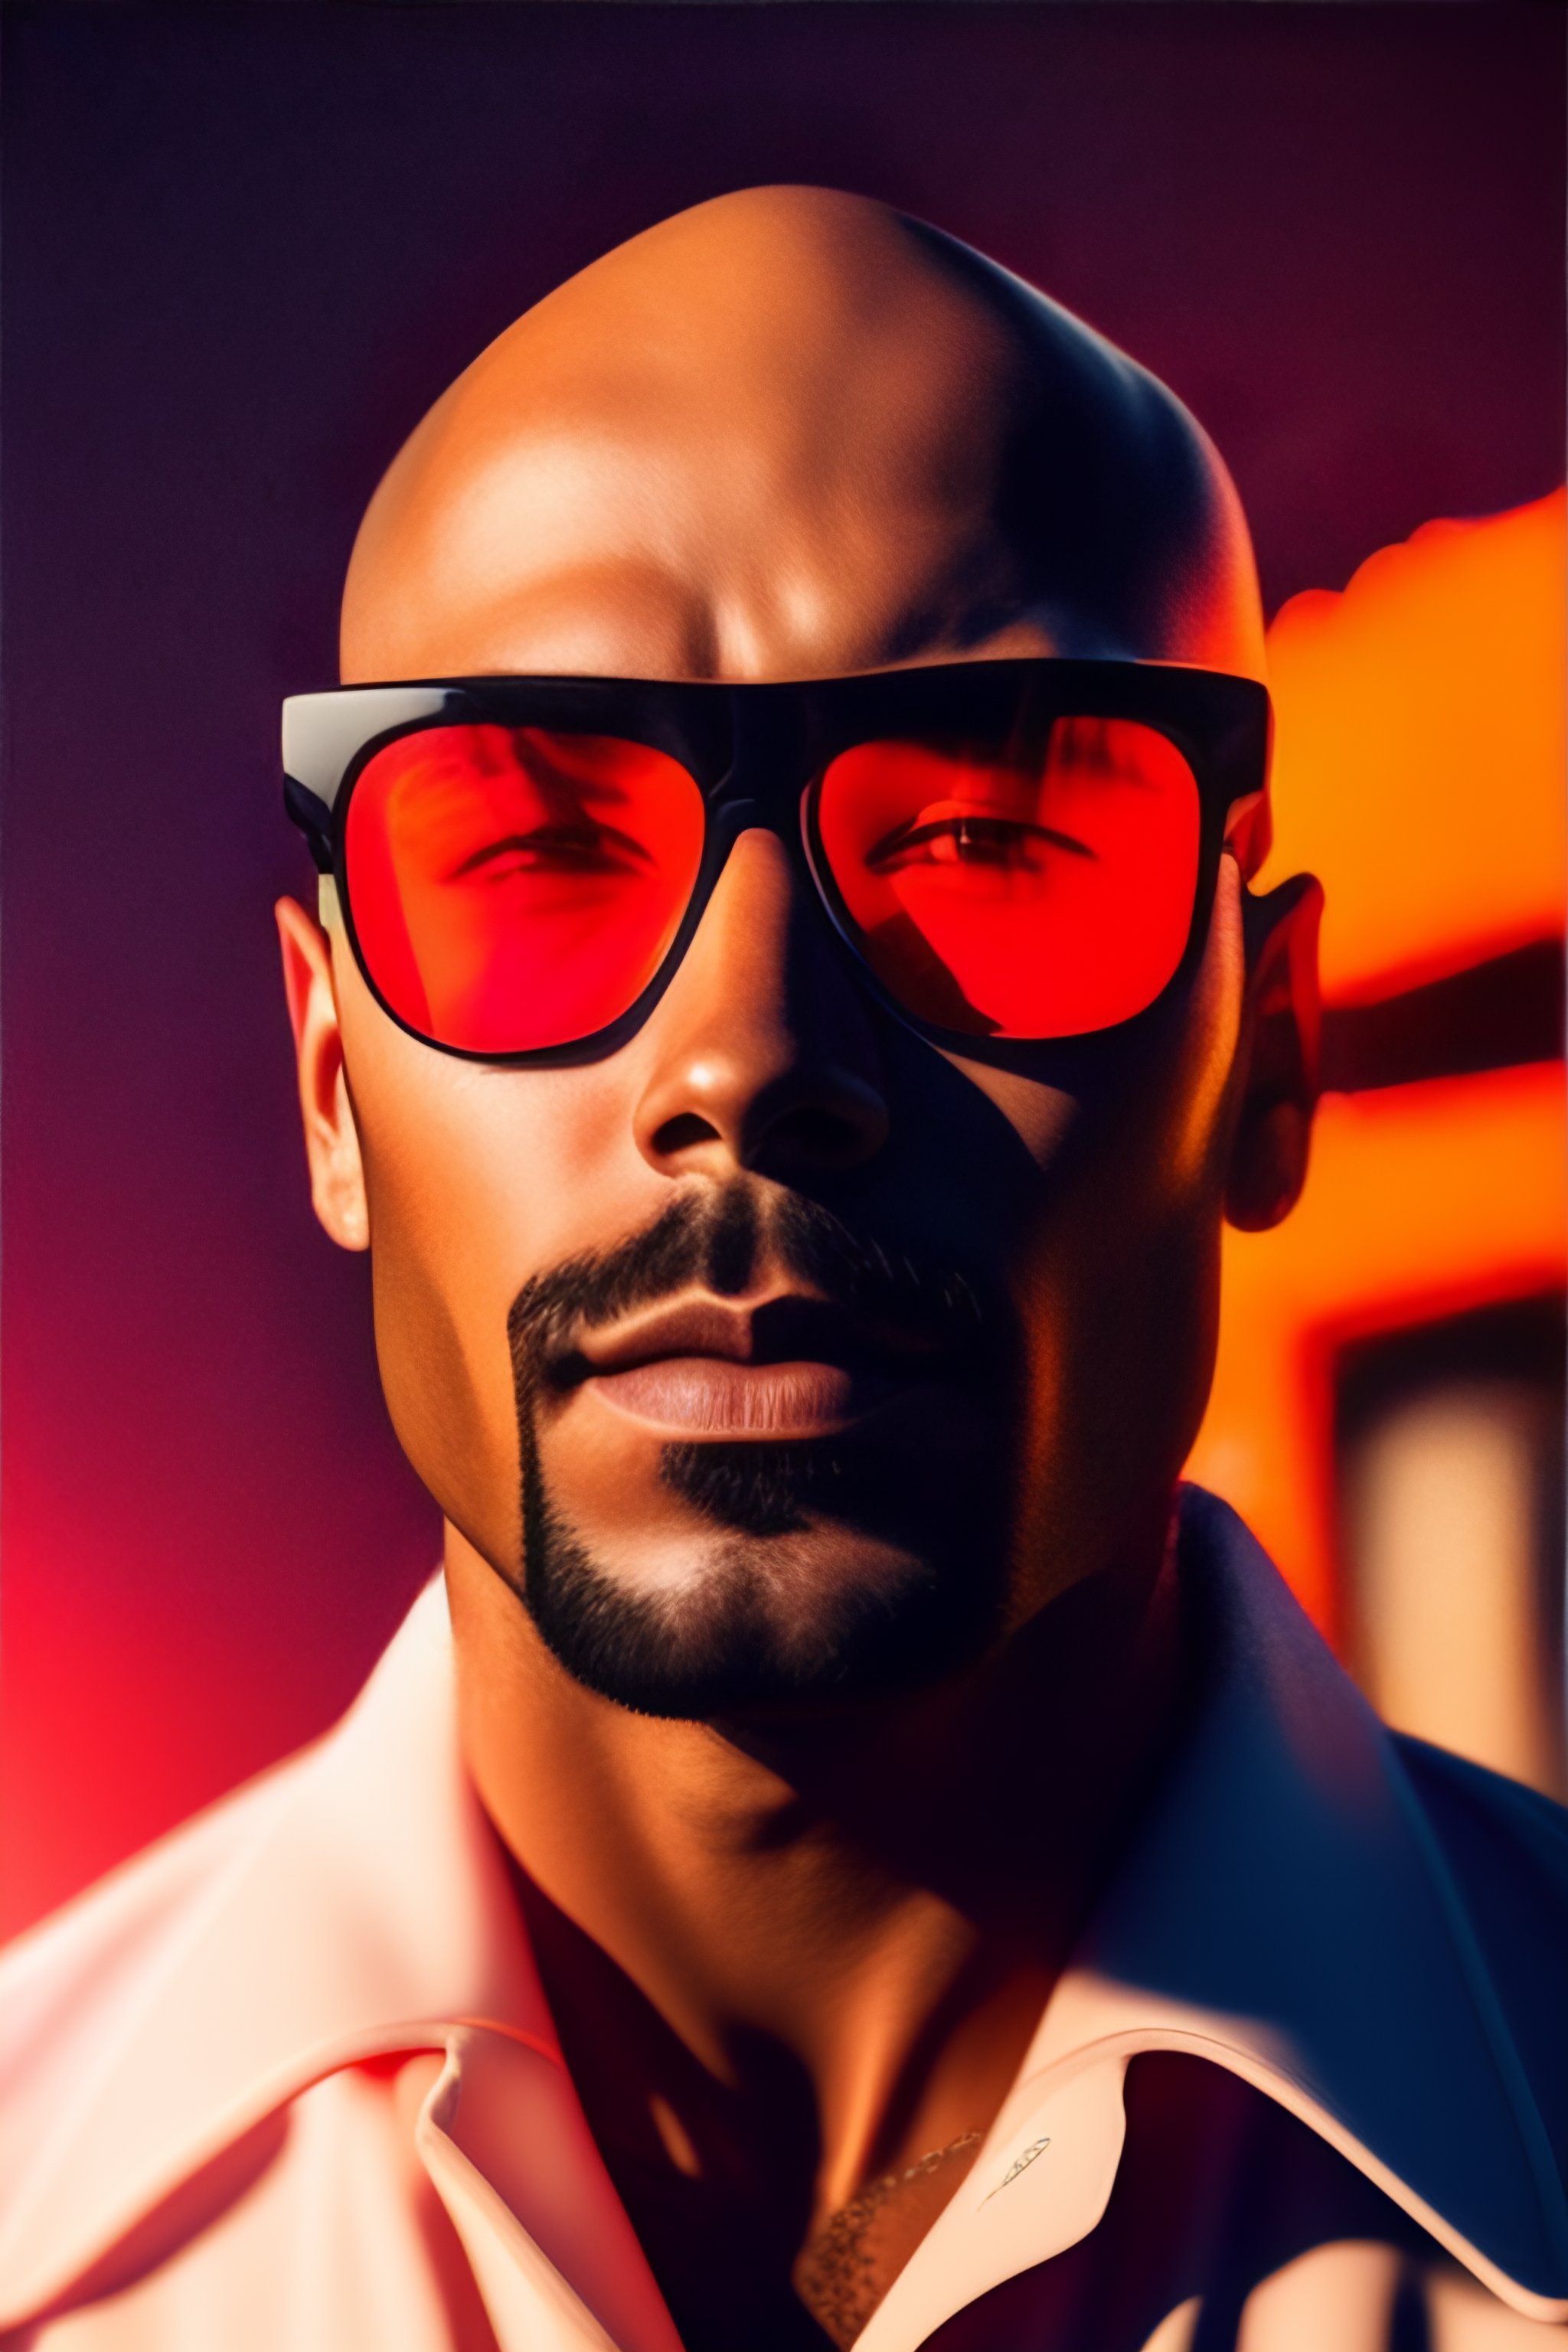 Andrew Tate Sunglasses: What Sunglasses Does Andrew Tate Wear?